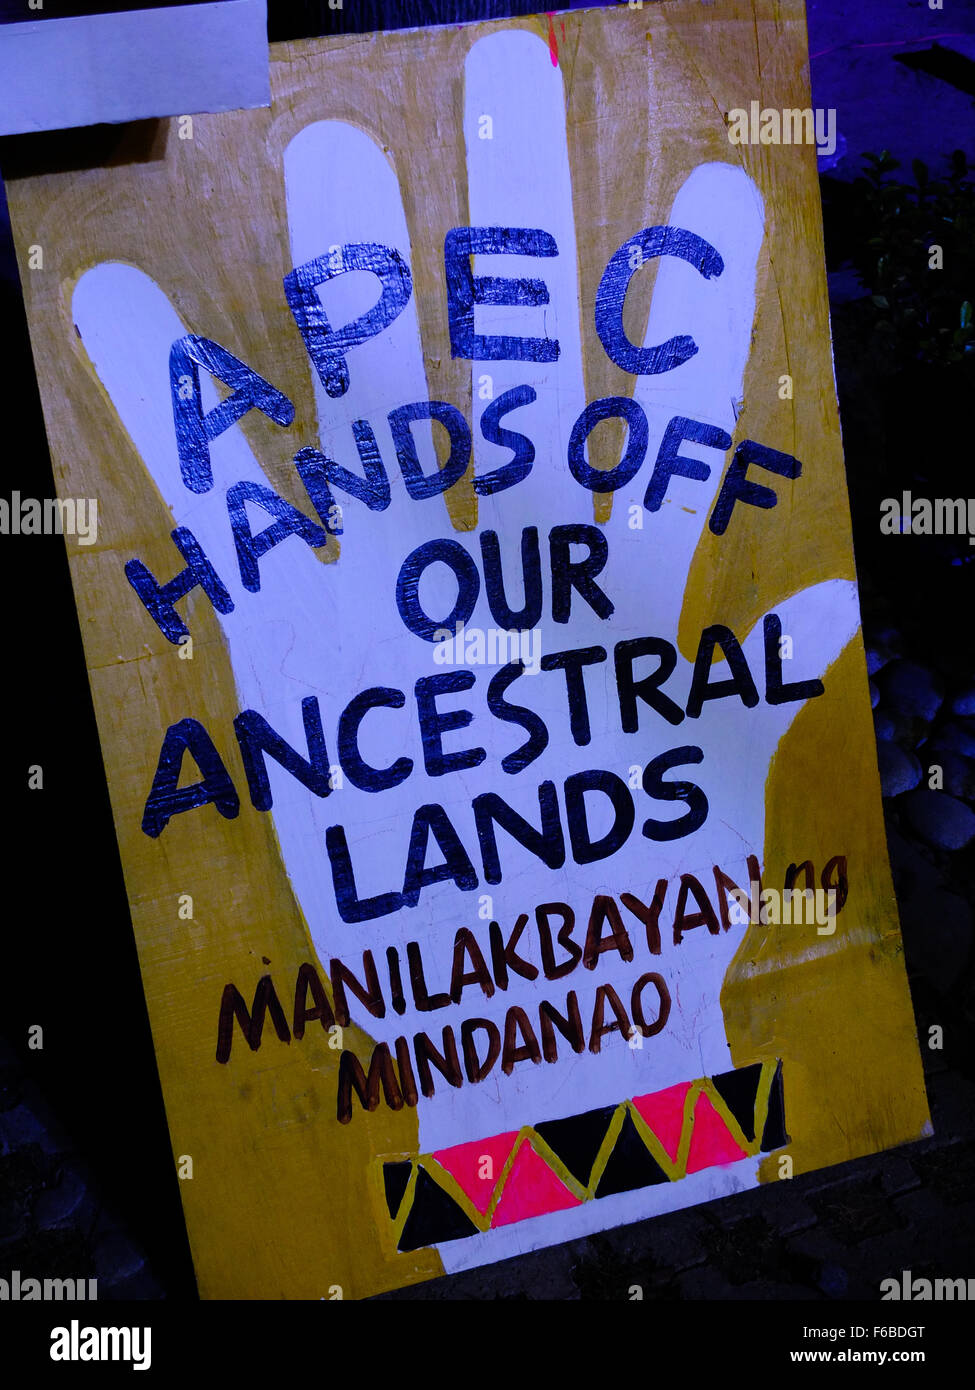 A placard with a meaningful slogan during the Solidarity Cultural Night. The Lumad peoples are a group of indigenous people of the southern Philippines. It is a Cebuano term meaning 'native' or 'indigenous'. The term is short for Katawhang Lumad (literally 'indigenous peoples'), the autonym officially adopted by the delegates of the Lumad Mindanao Peoples Federation (LMPF) founding assembly on 26 June 1986 at the Guadalupe Formation Center, Balindog, Kidapawan, Cotabato, Philippines. It is the self-ascription and collective identity of the indigenous peoples of Mindanao. (Photo by Josefiel Riv Stock Photo